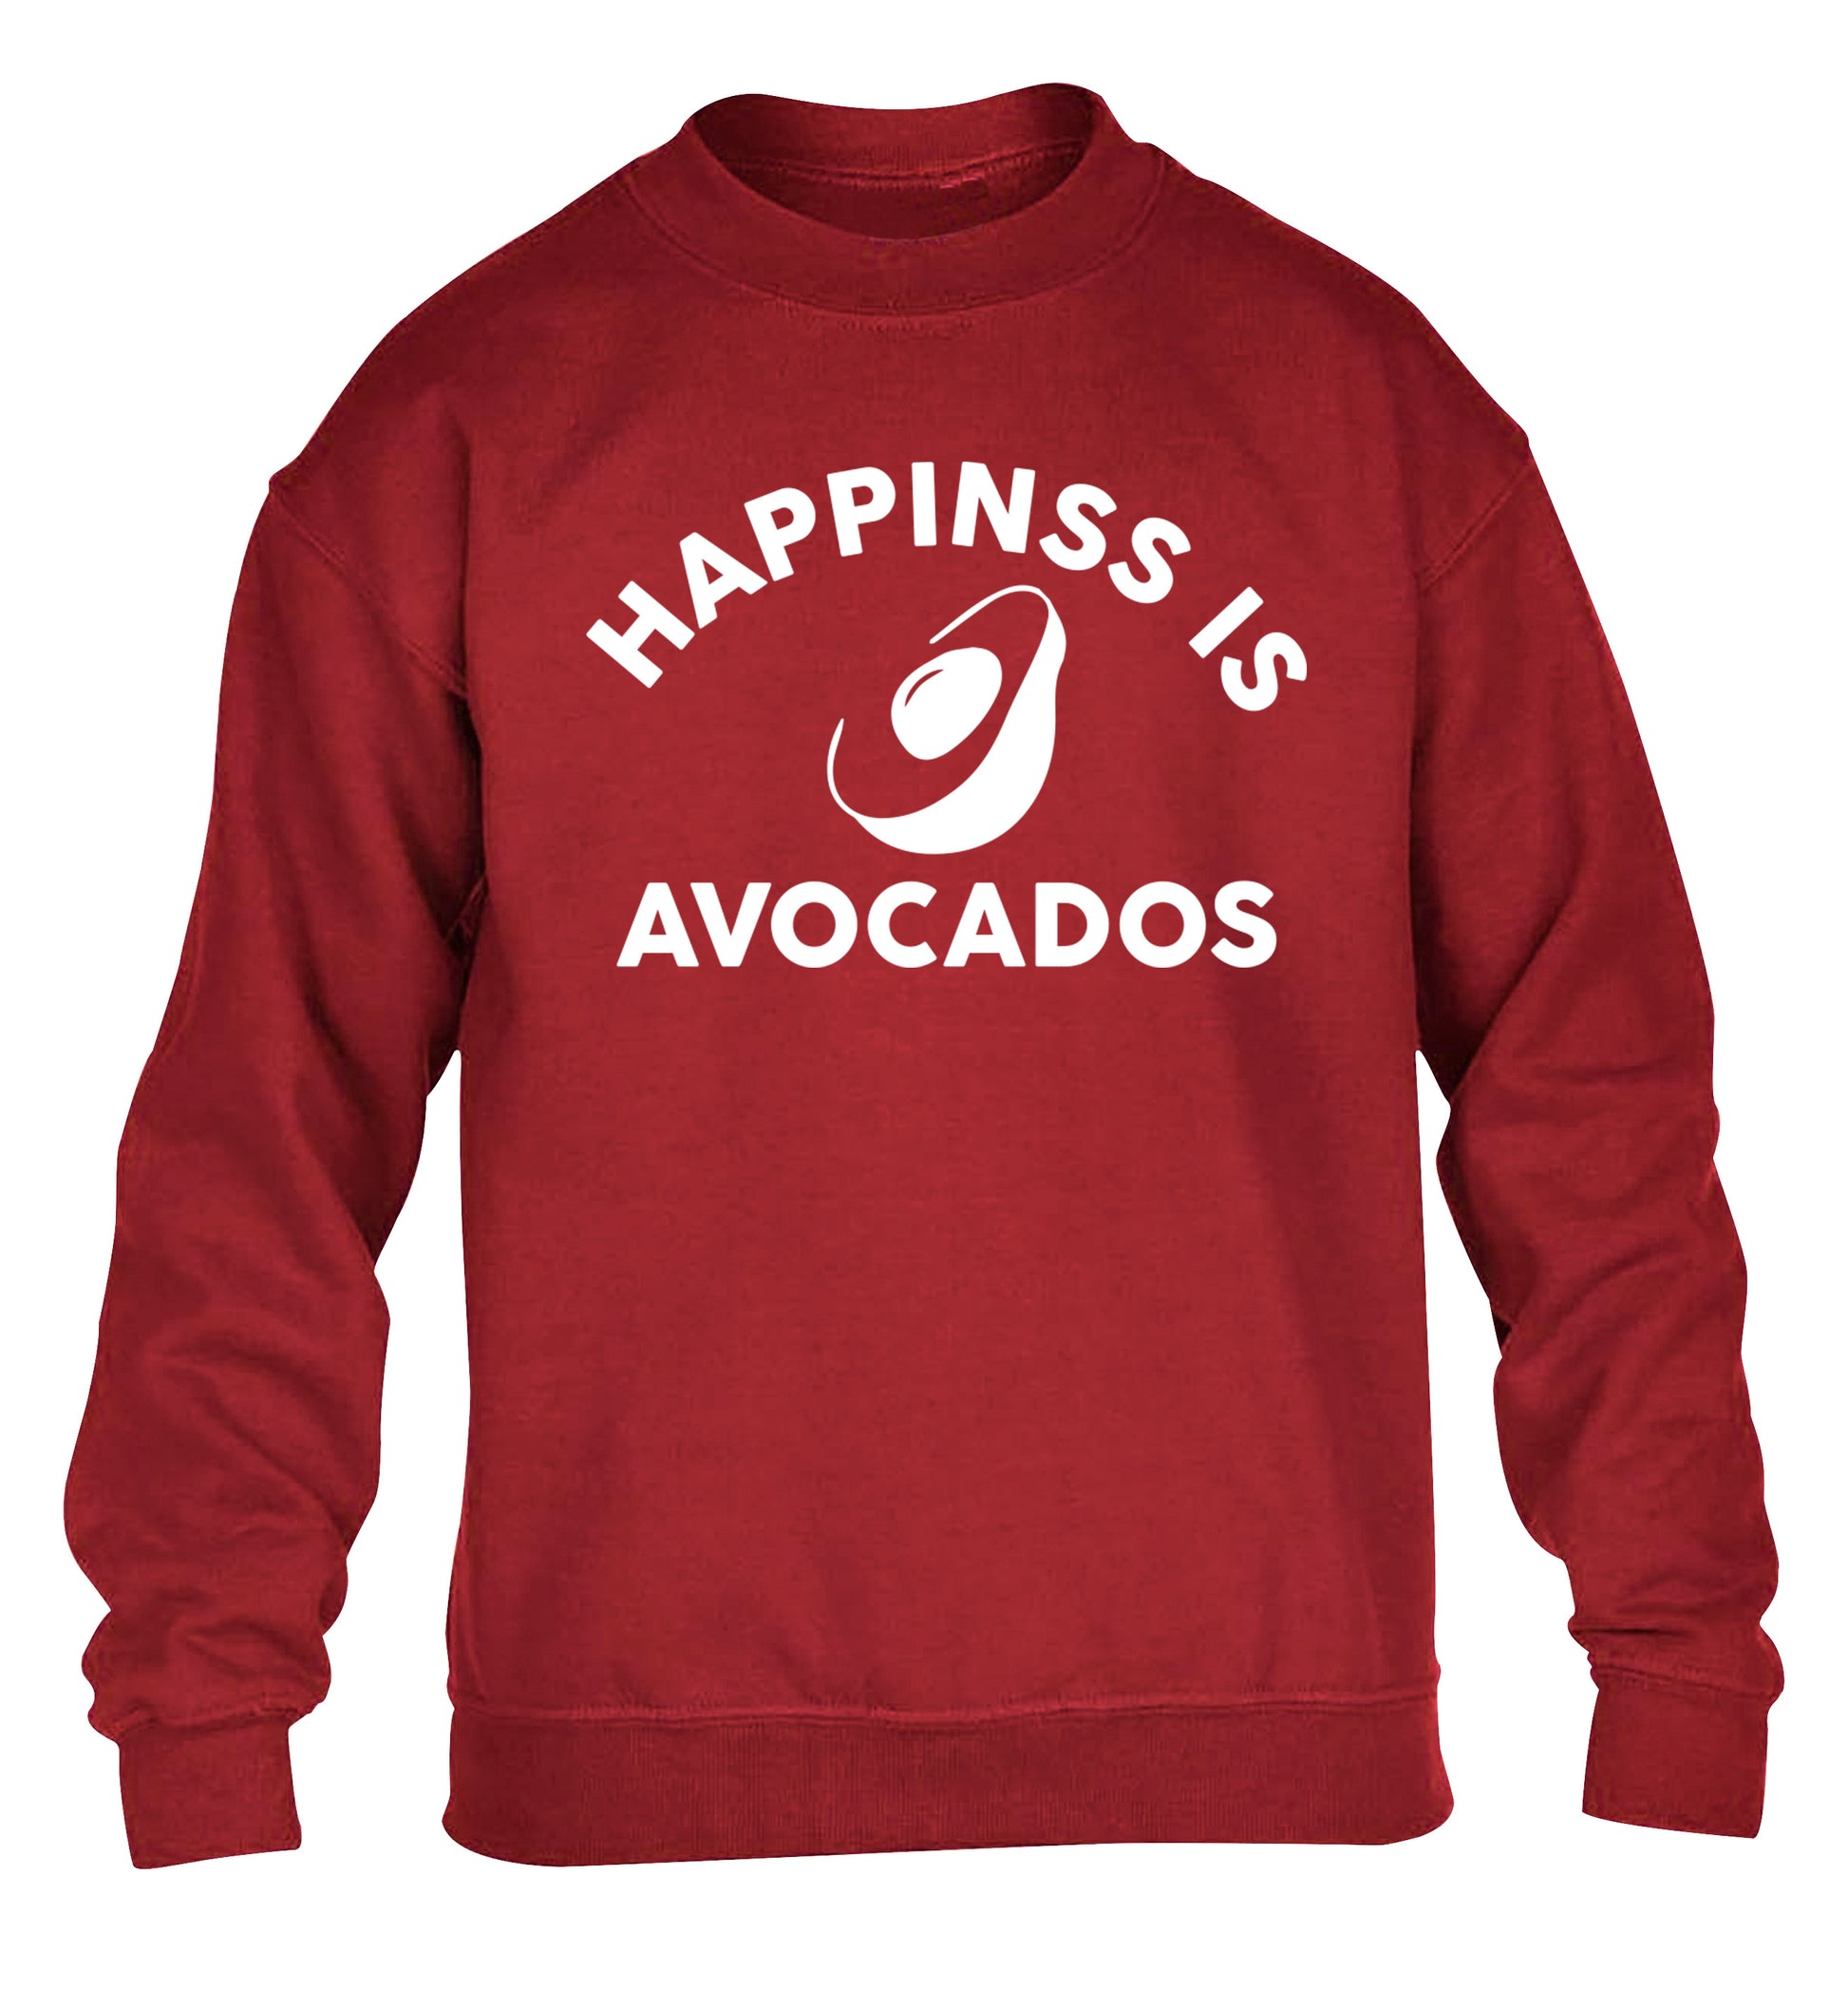 Happiness is avocados children's grey sweater 12-14 Years